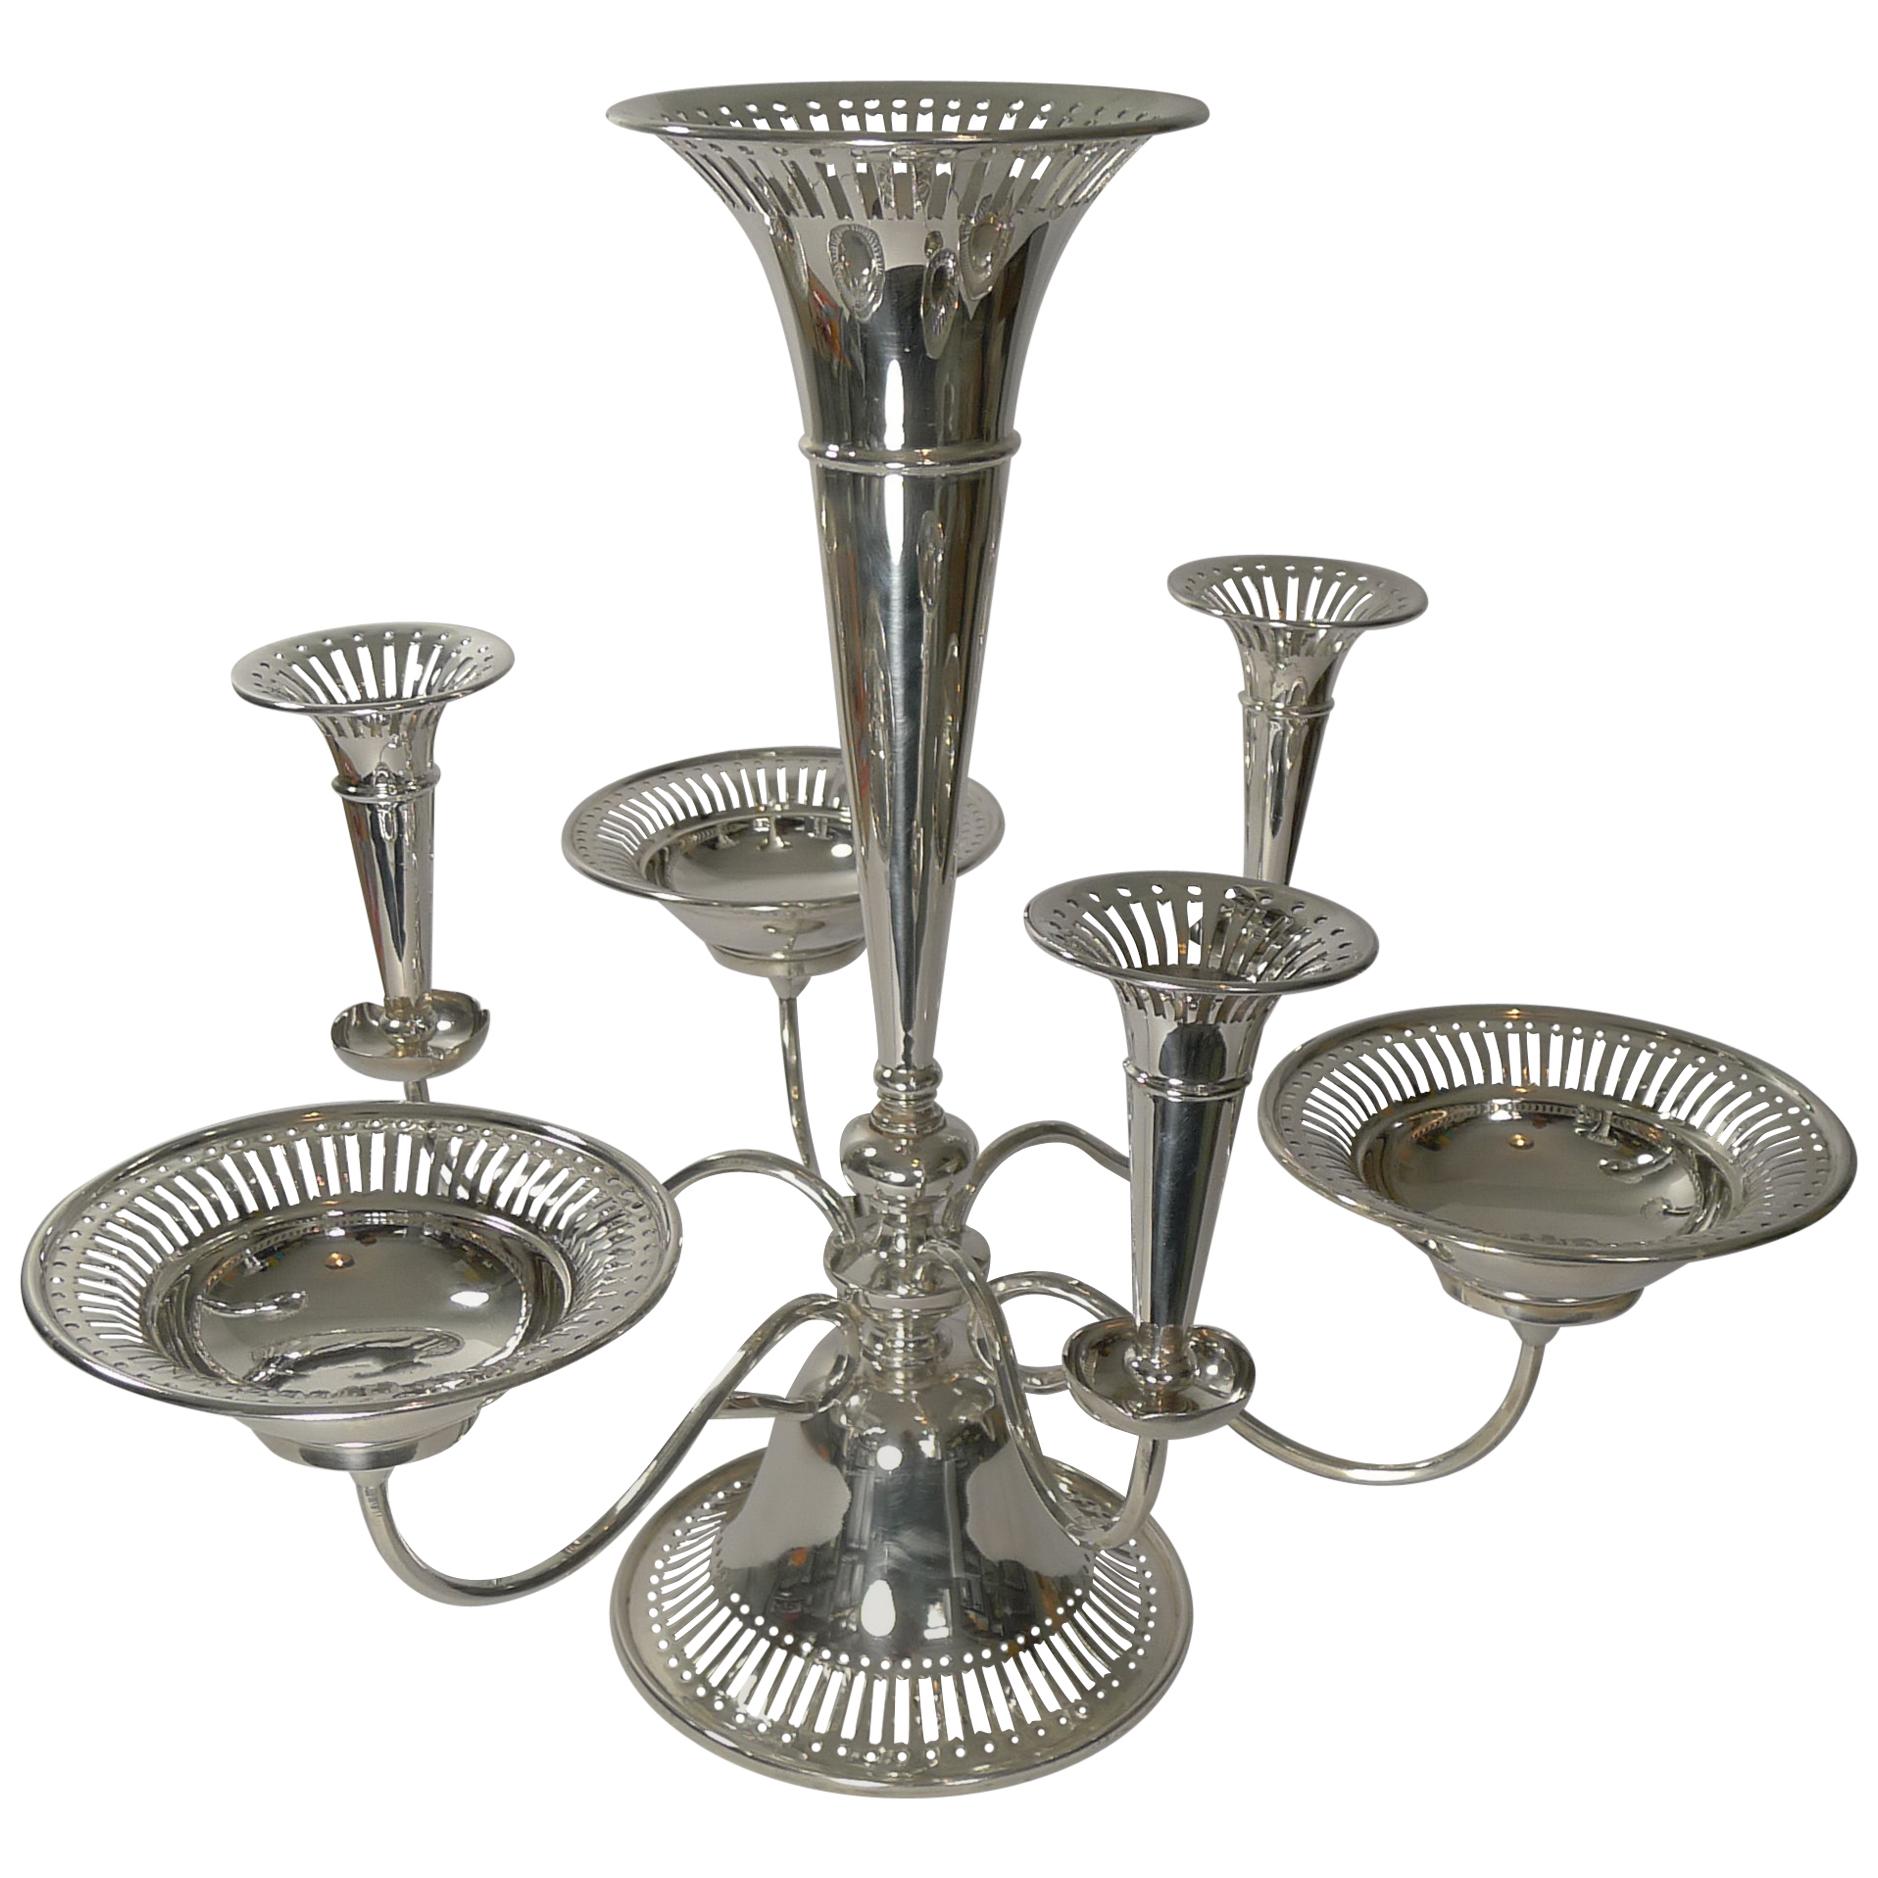 Large Antique English Silver Plated Centerpiece, circa 1910